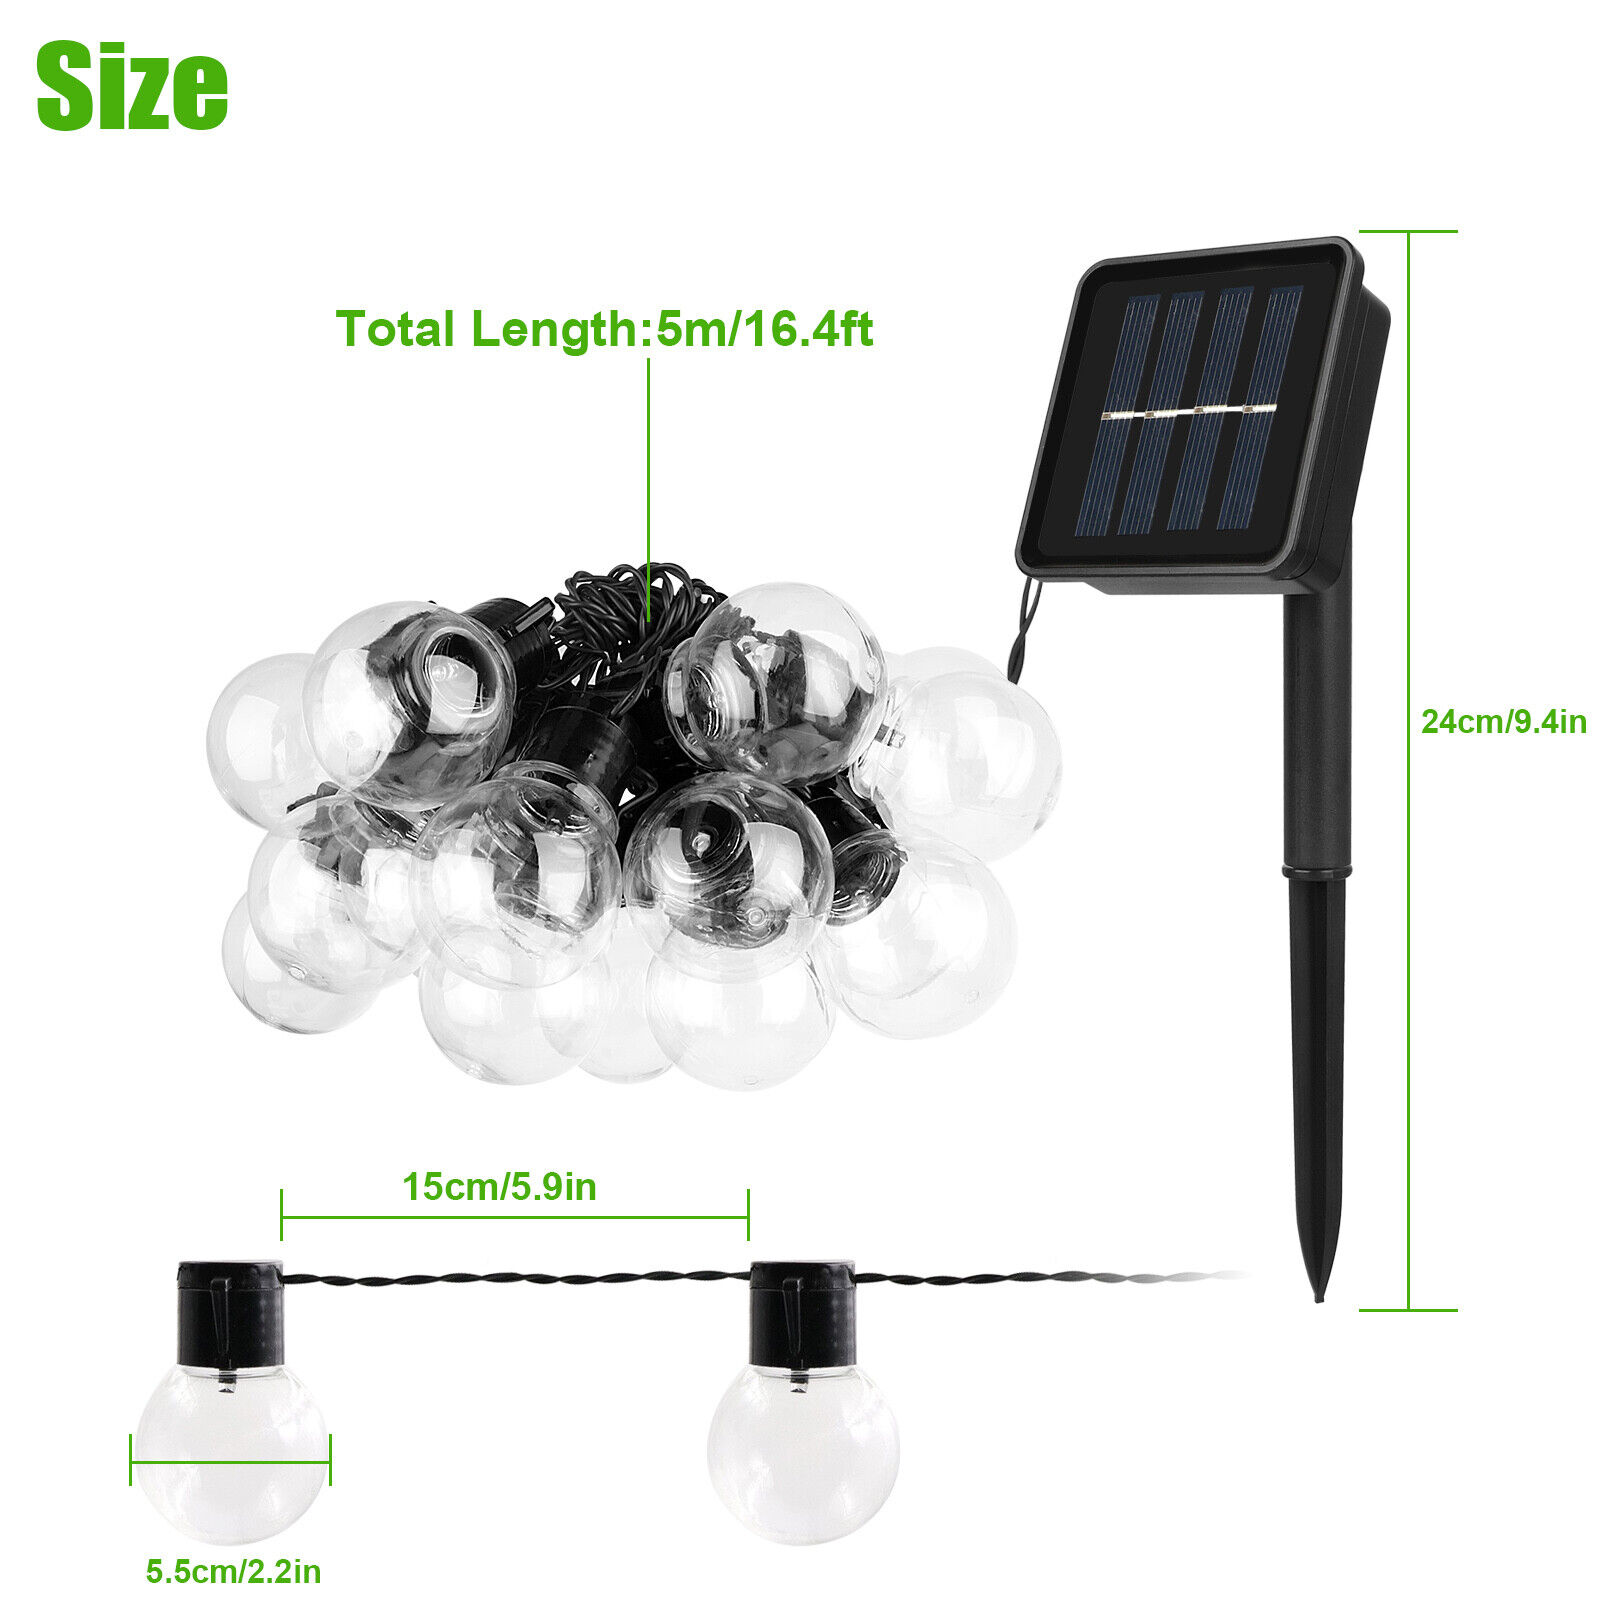 LED-Ceiling-Lights-Solar-Outdoor-Light-String-5M-20LED-Bulb-LED-Transparent-Ball-Night-Light-IP55-Waterproof-Camping-Atmosphere-Tent-Light-Christmas-Day-Decoration-Light-17